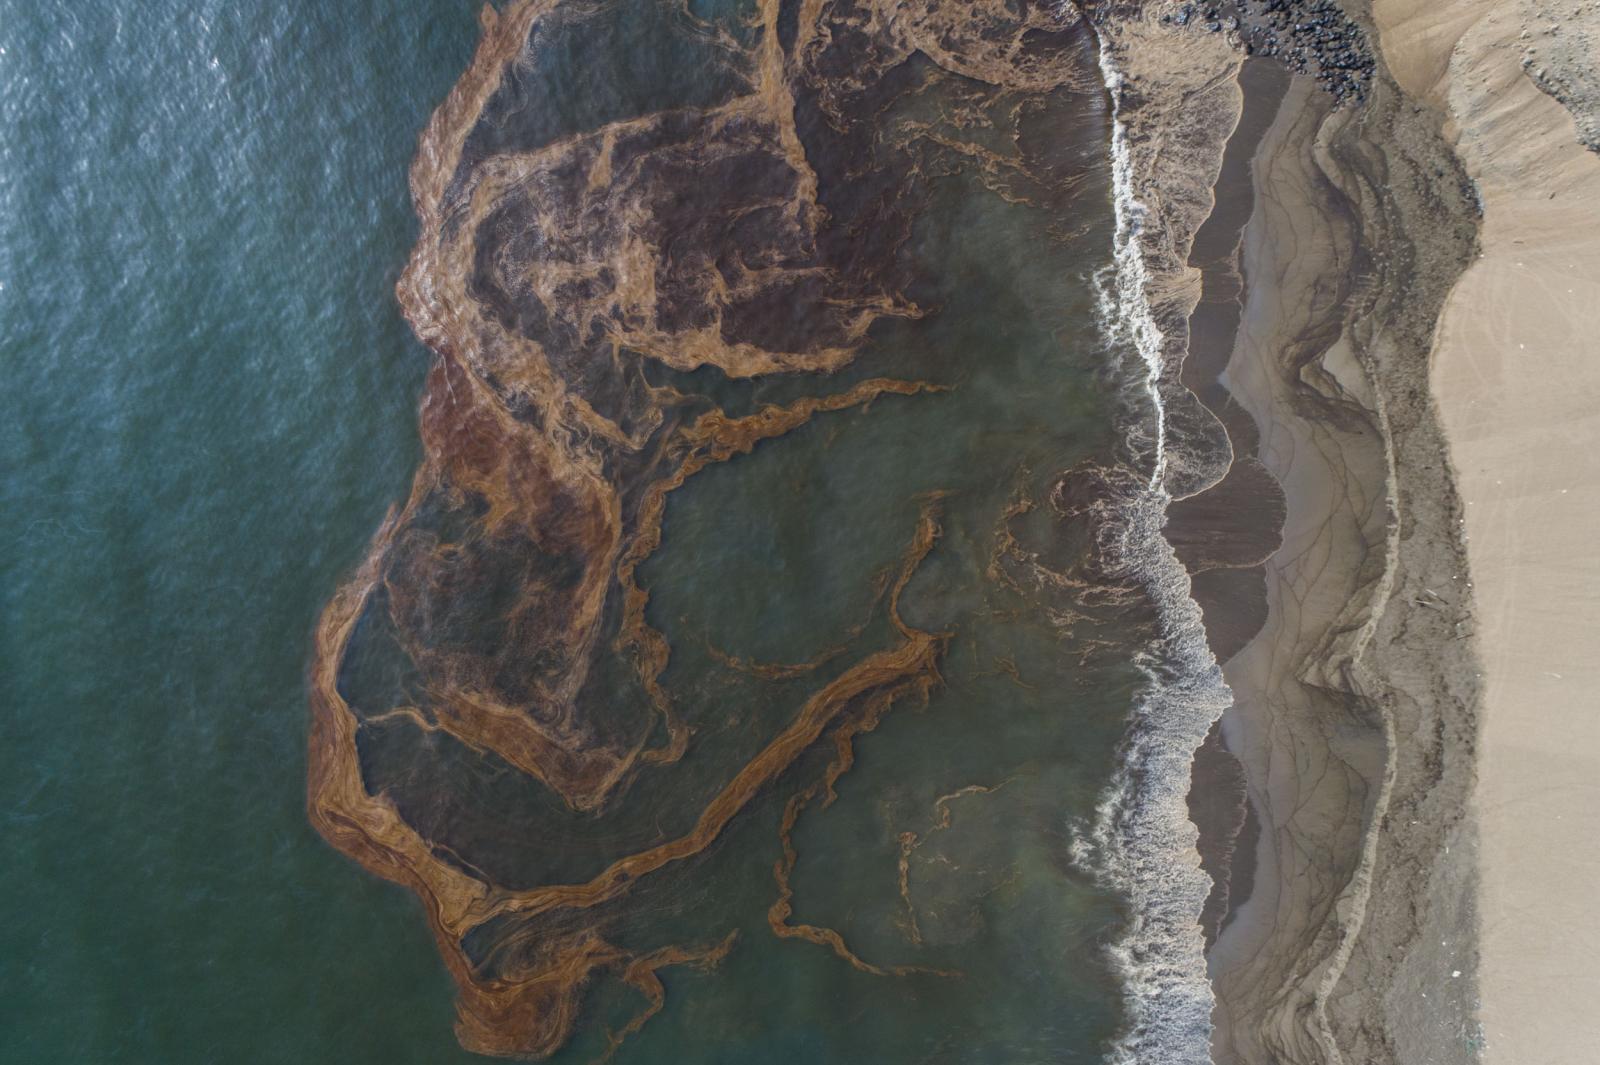 Thumbnail of Ojo Público: The Repsol spill exposes the gaps in environmental control in Peru